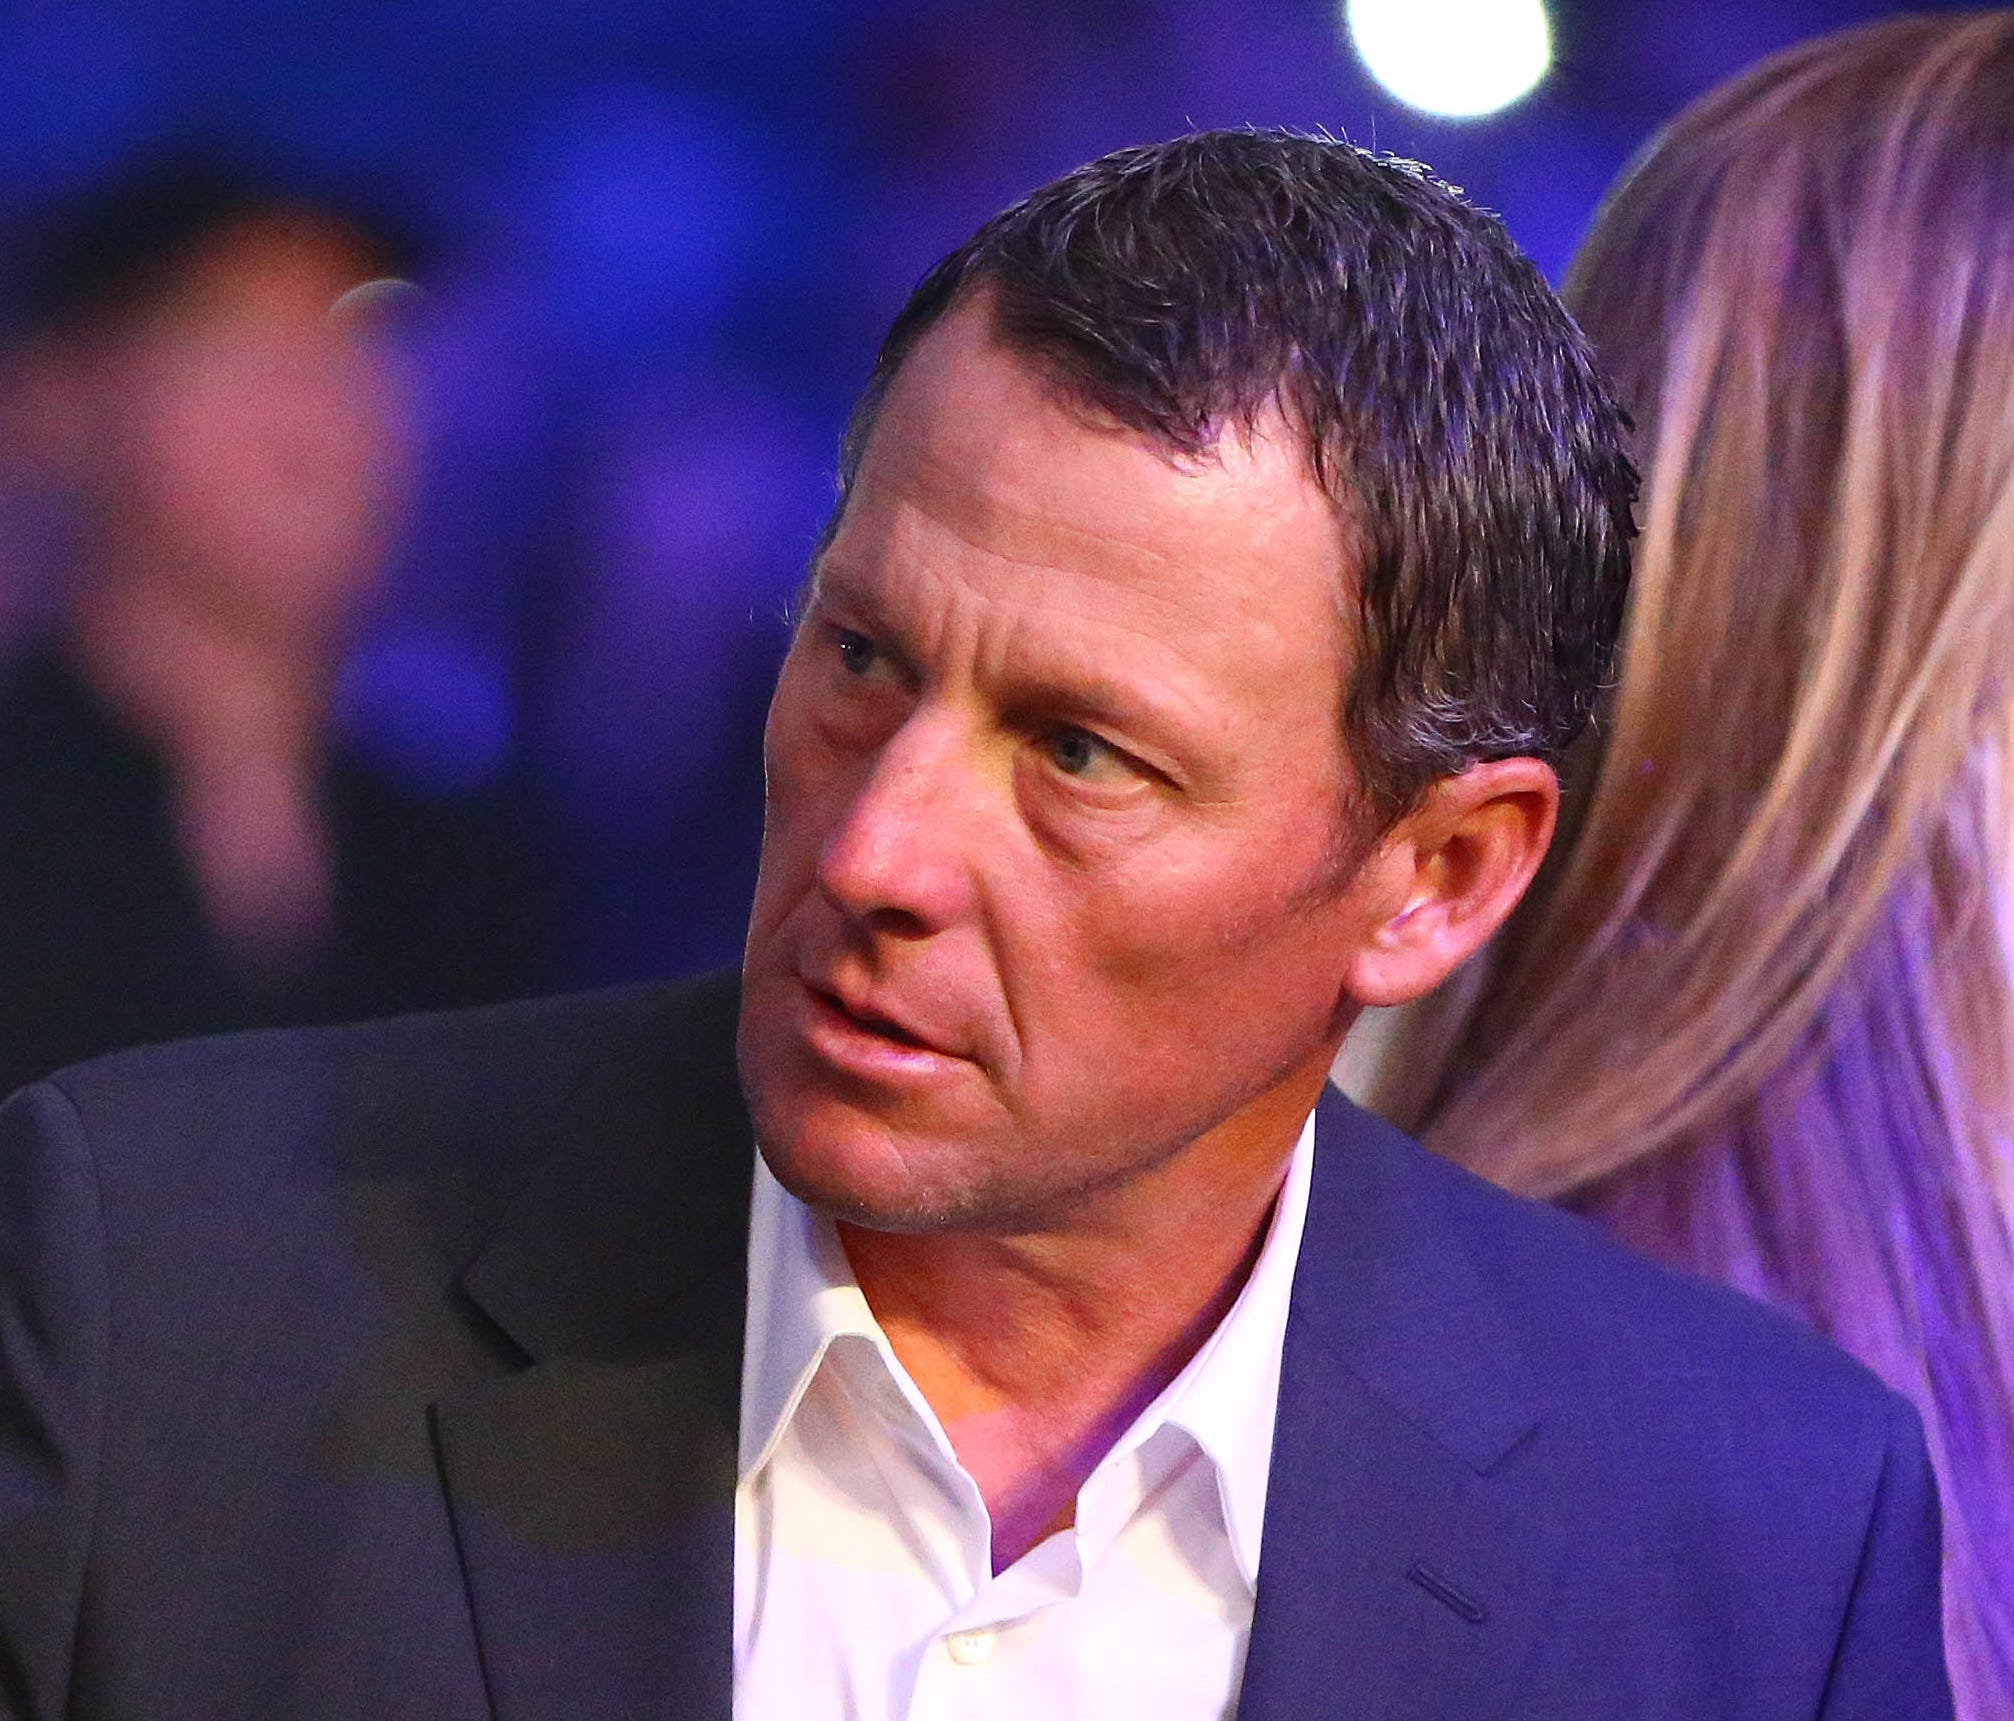 The government filed suit against Lance Armstrong in 2013, shortly after he confessed to doping after more than a decade of denials.